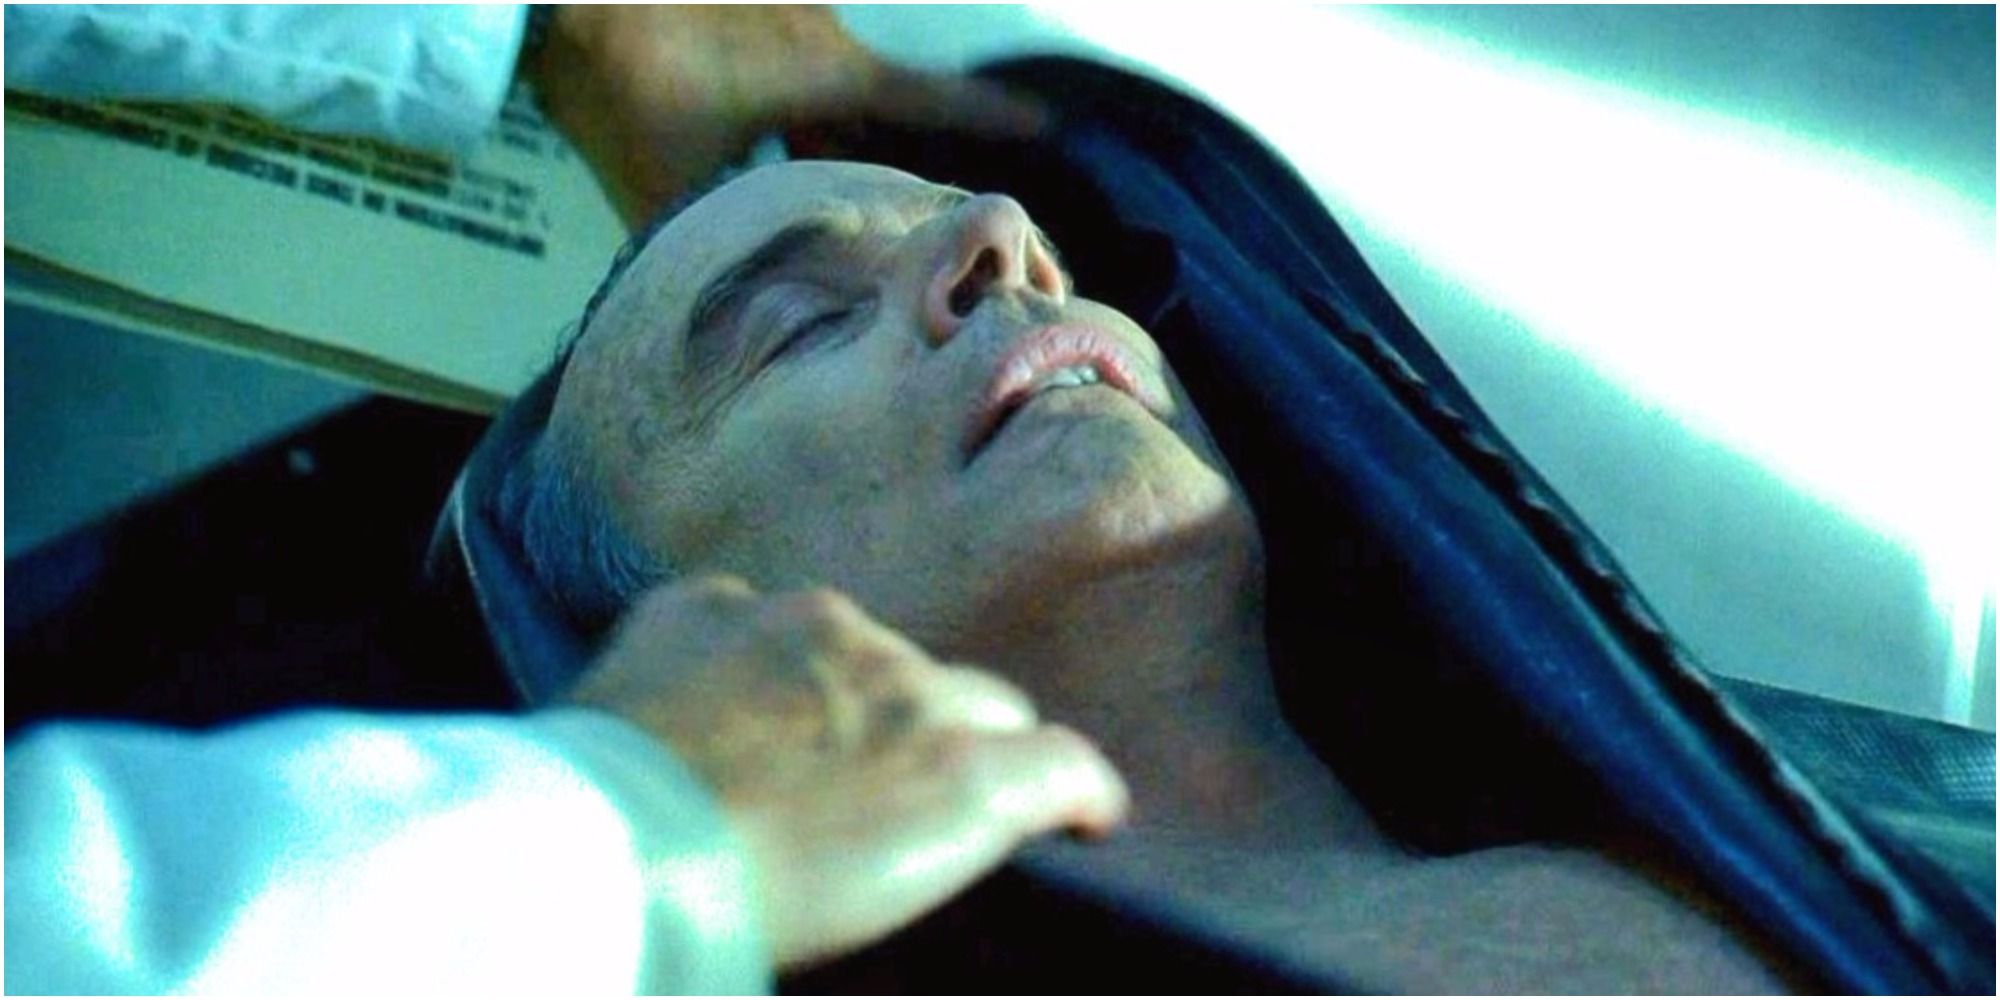 On Lost, The body of Jack's Father Christian disappeared.